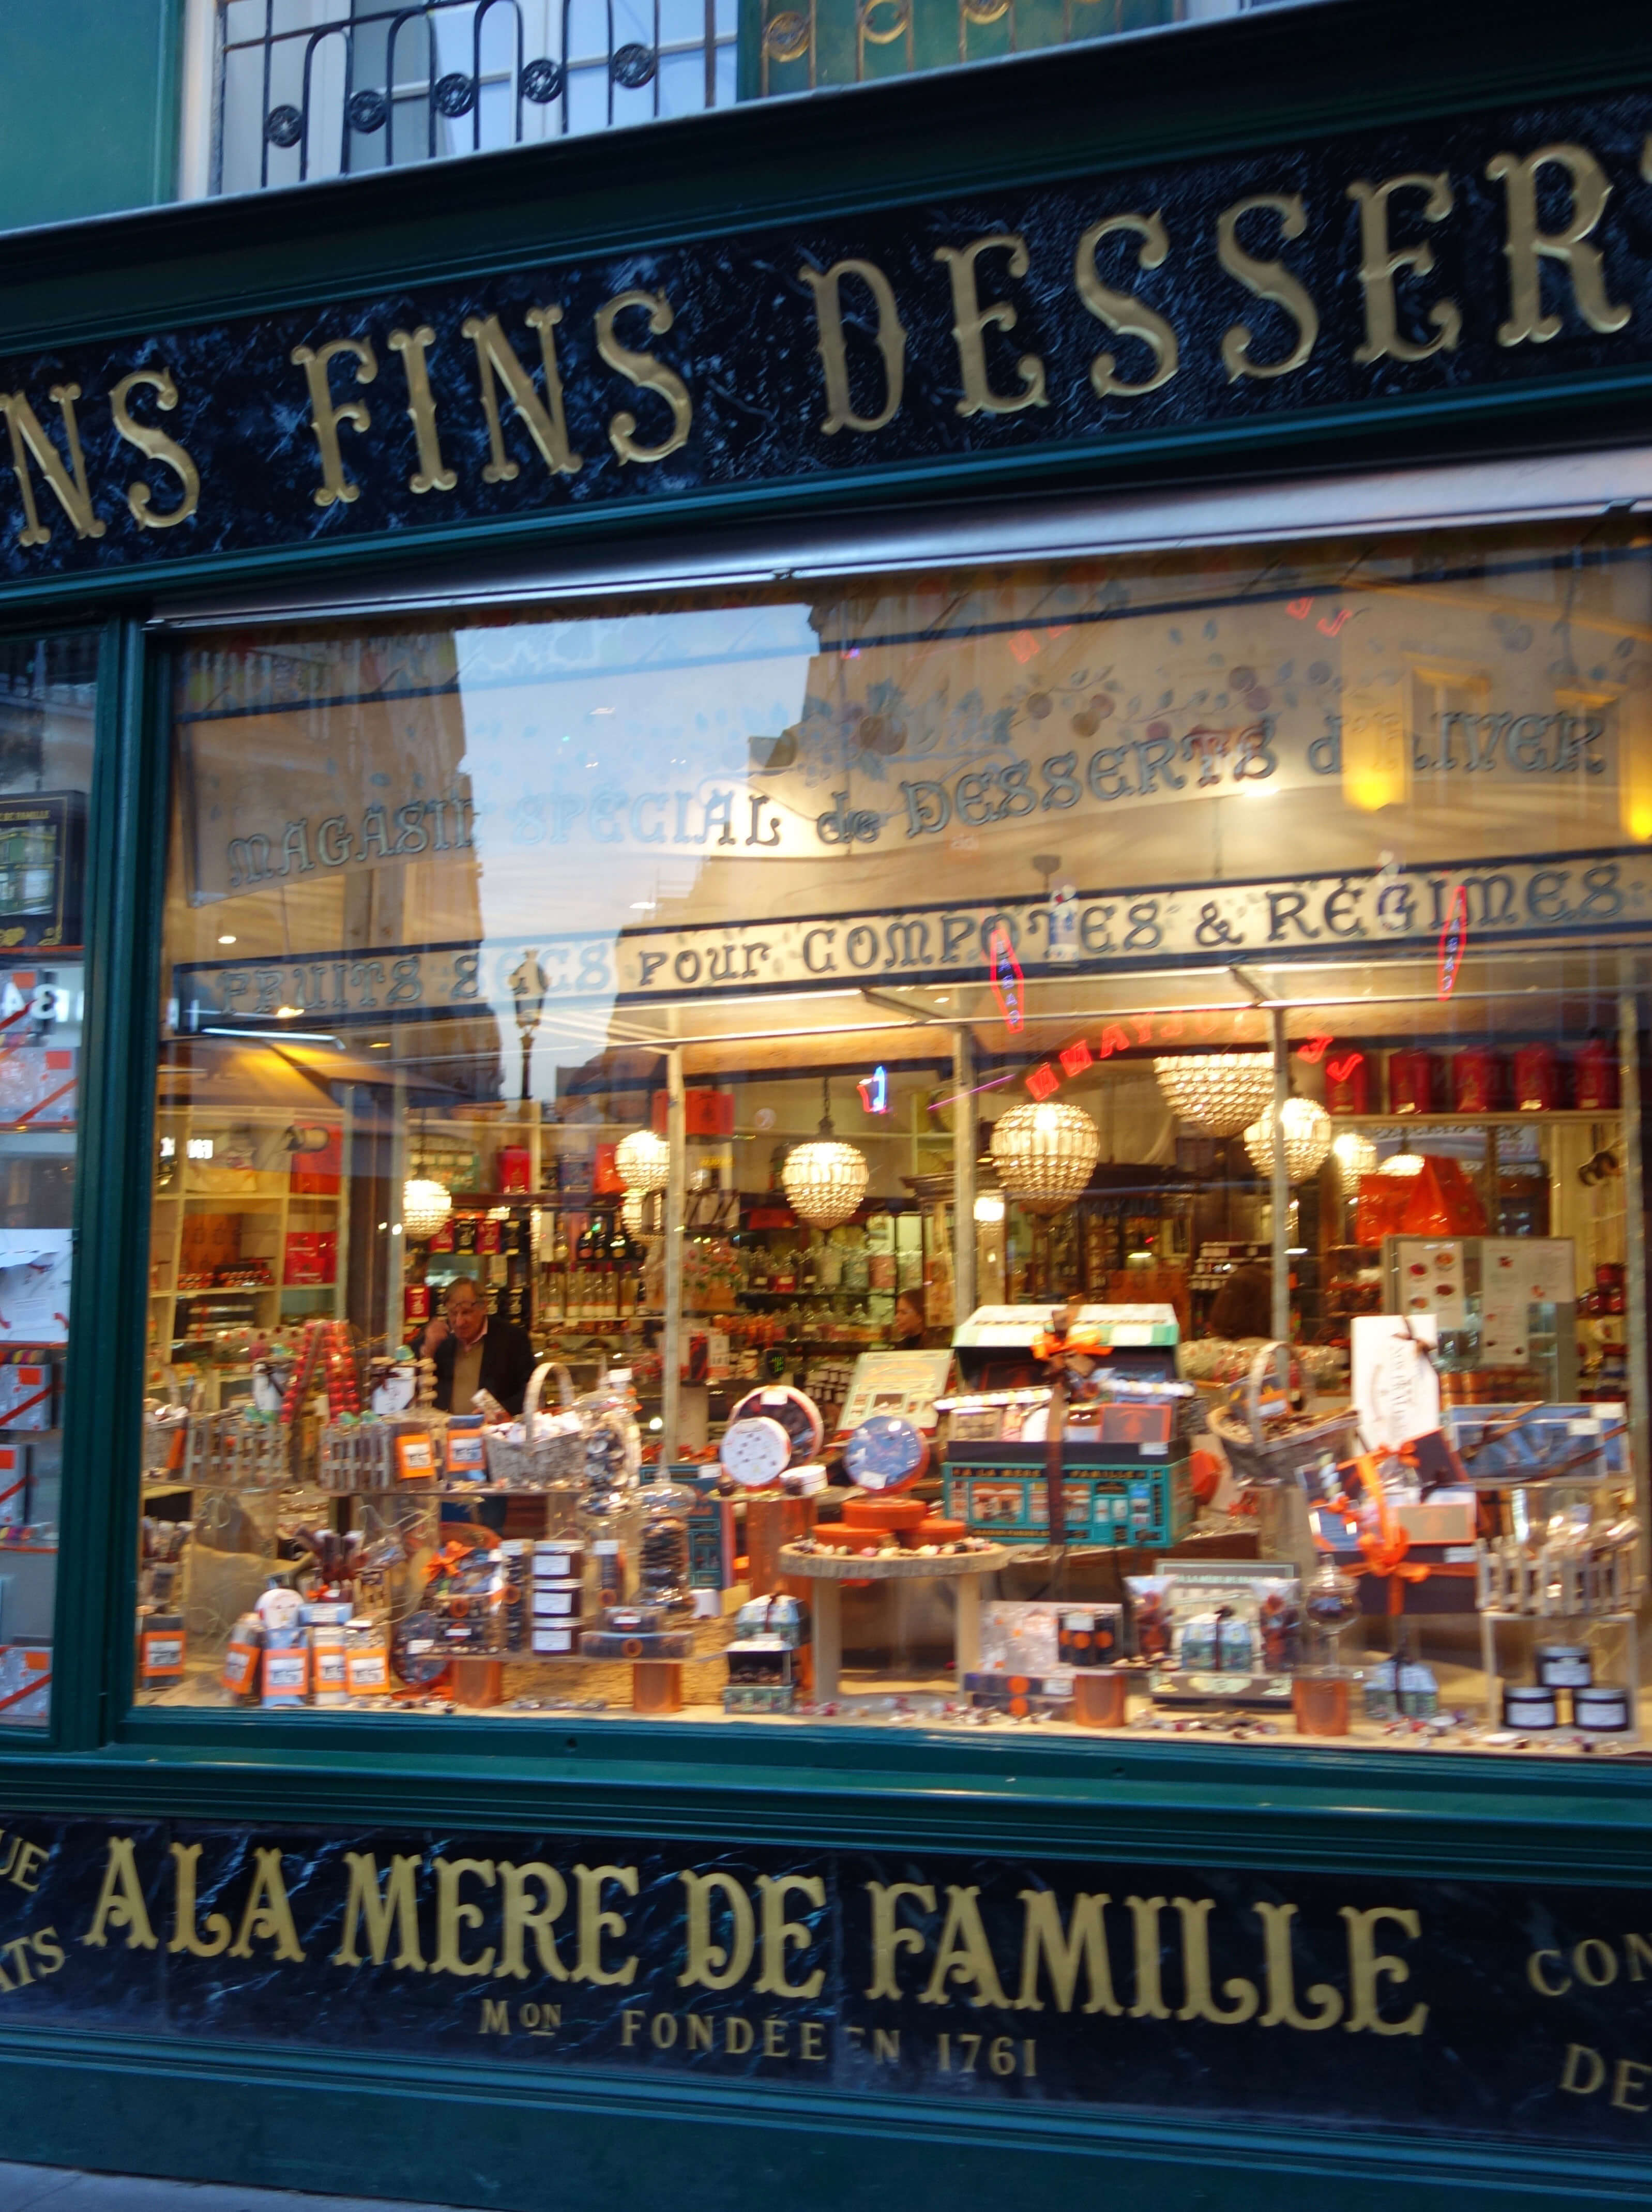 Visiting Kitchen Supply Stores in Paris - Join Us in France Travel Podcast